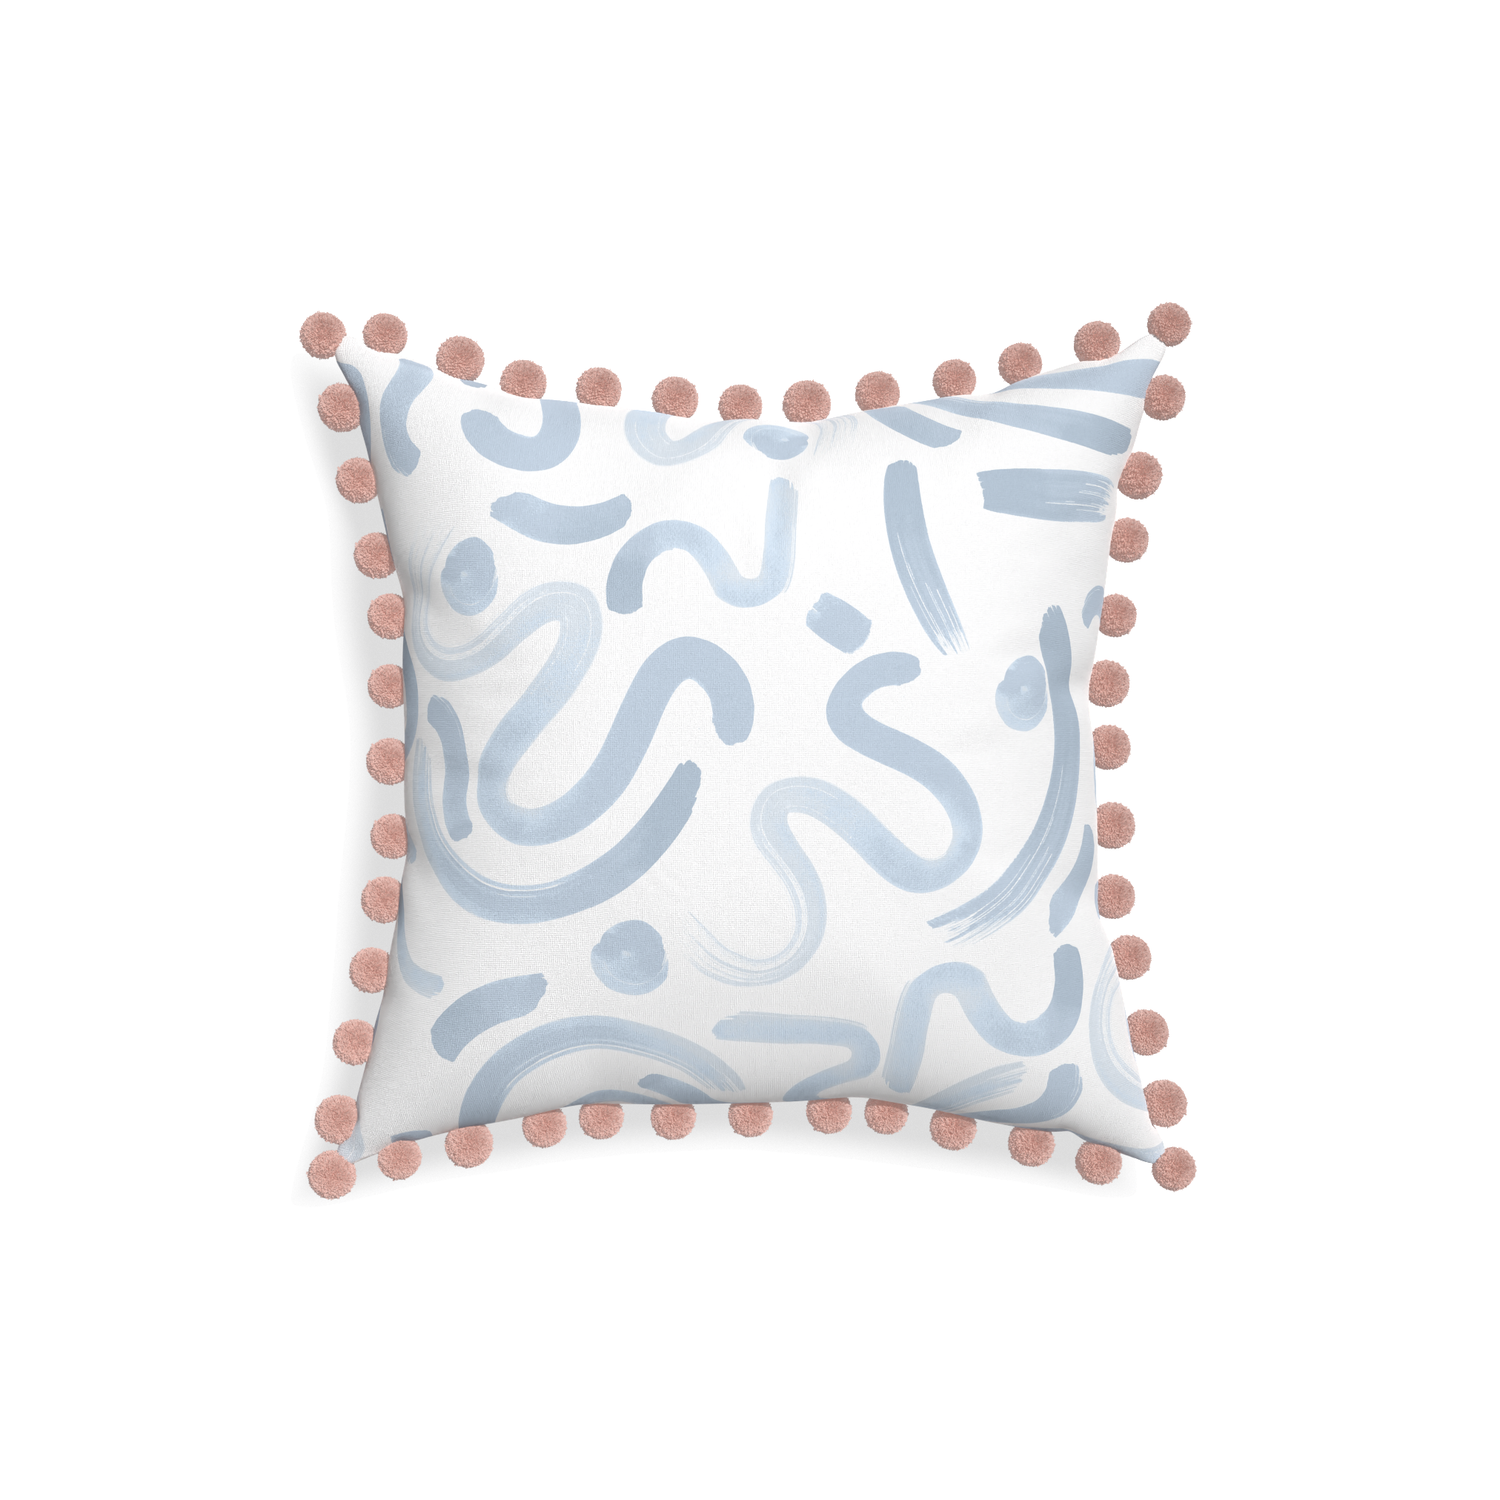 18-square hockney sky custom abstract sky bluepillow with rose pom pom on white background